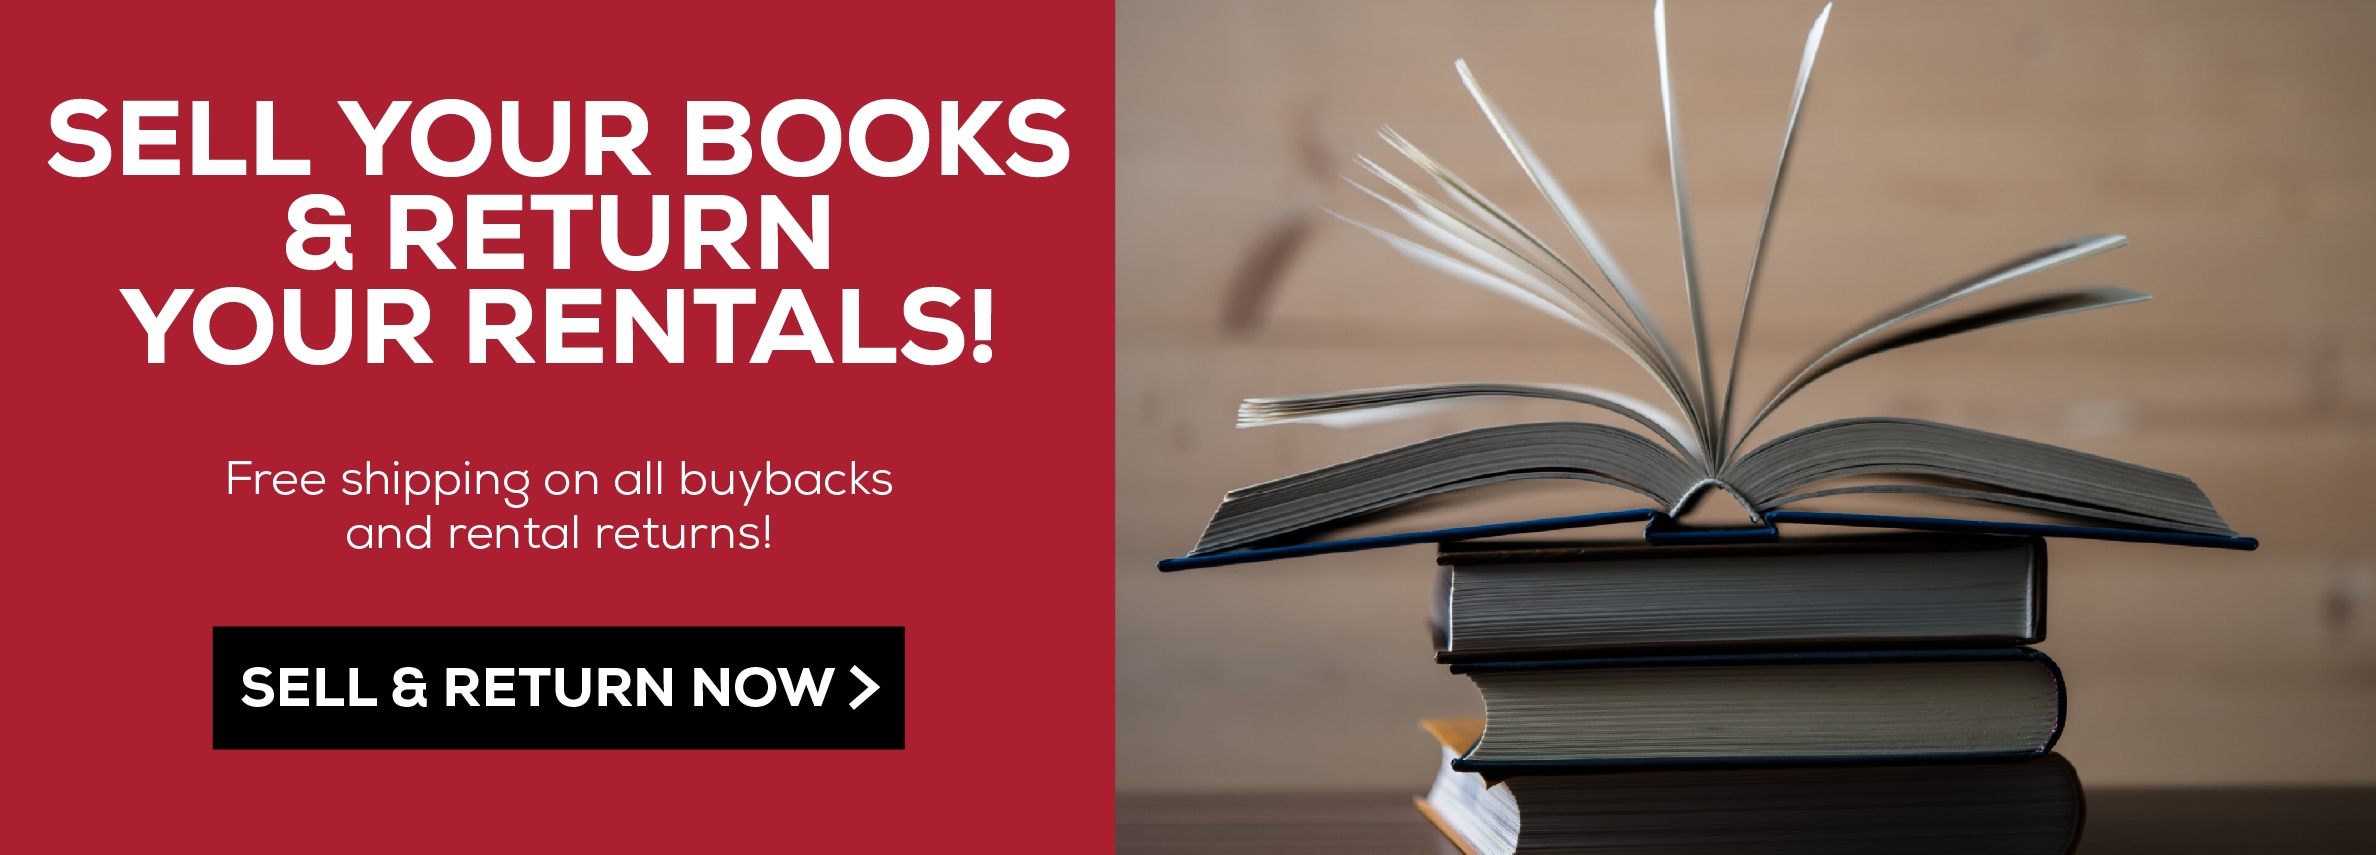 Sell your books and return your rentals! free shipping on all buybacks and rental returns! Sell and return now